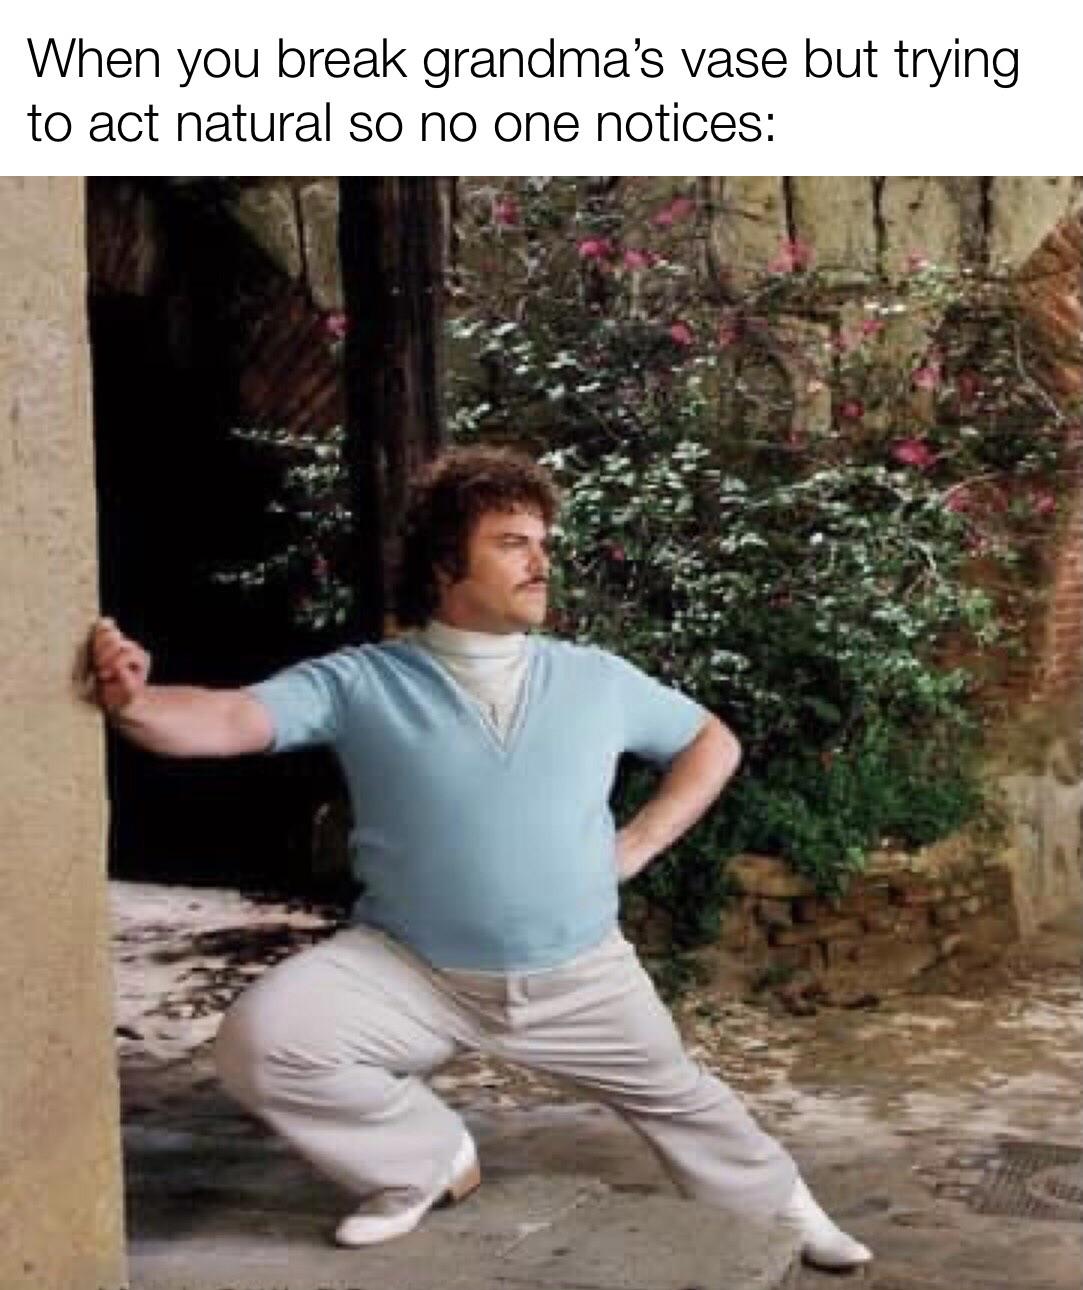 dank memes - jack black nacho libre - When you break grandma's vase but trying to act natural so no one notices